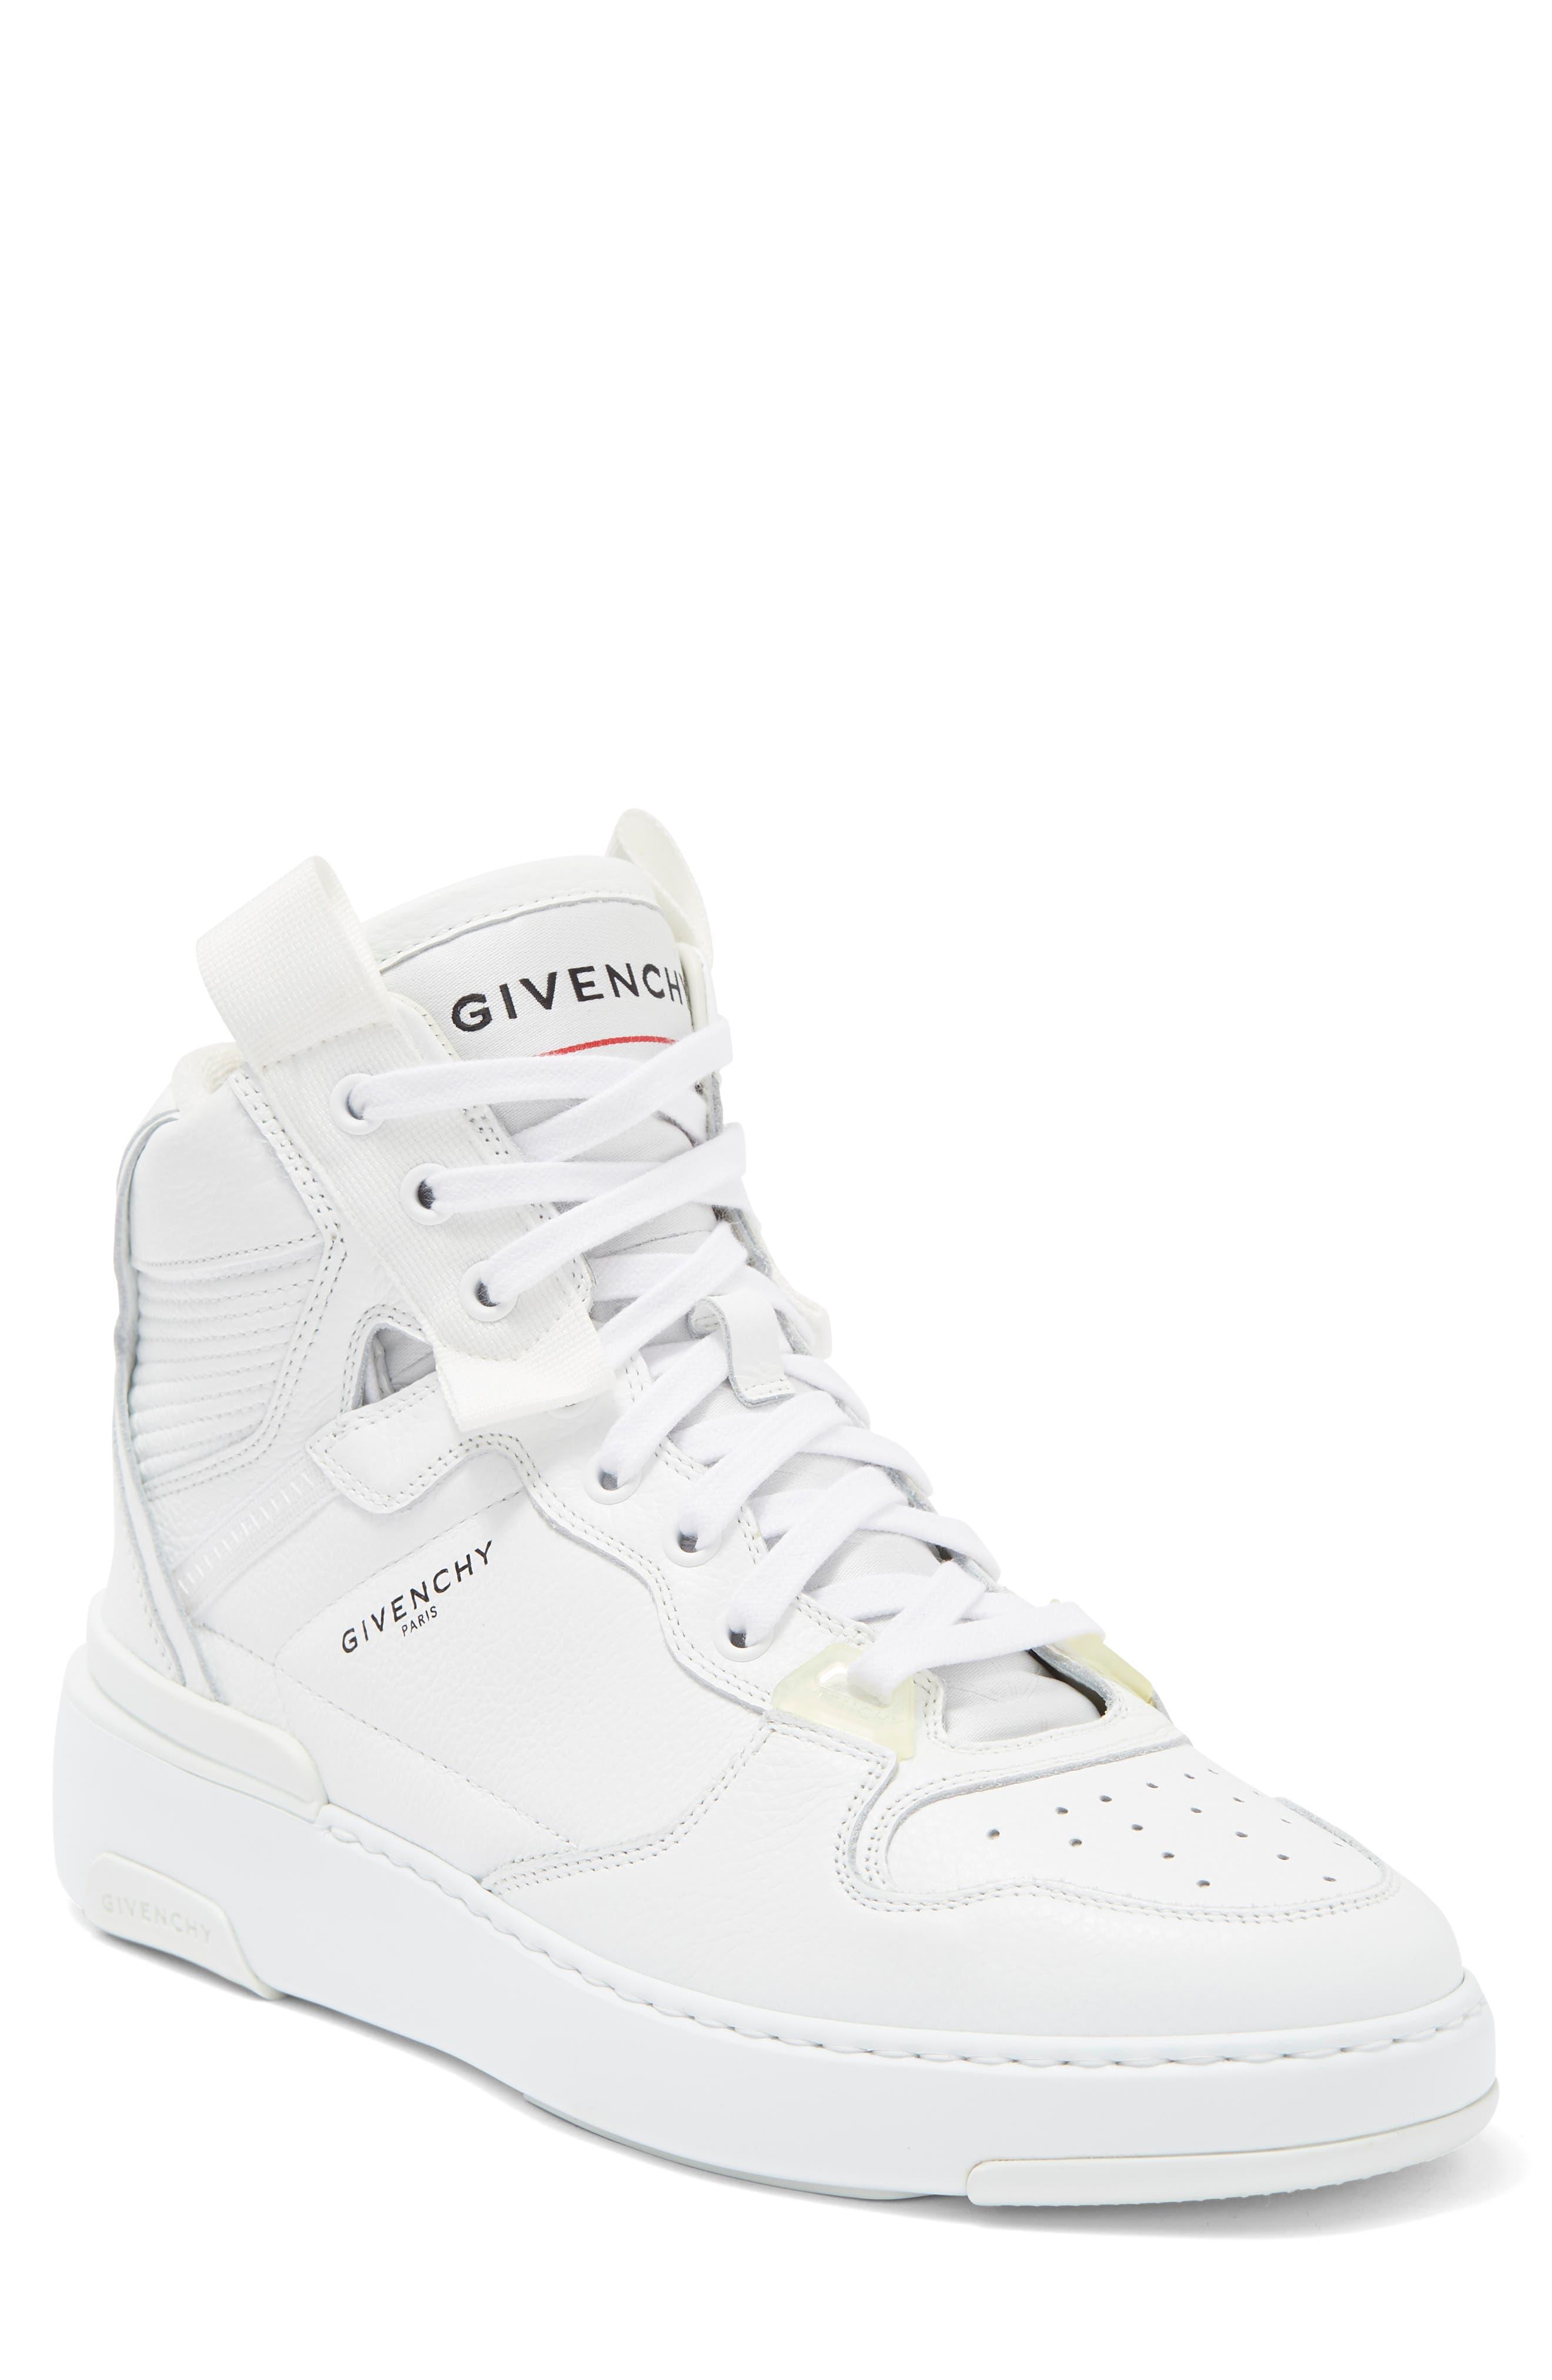 Givenchy Wing High Top Sneaker In White At Nordstrom Rack | Lyst